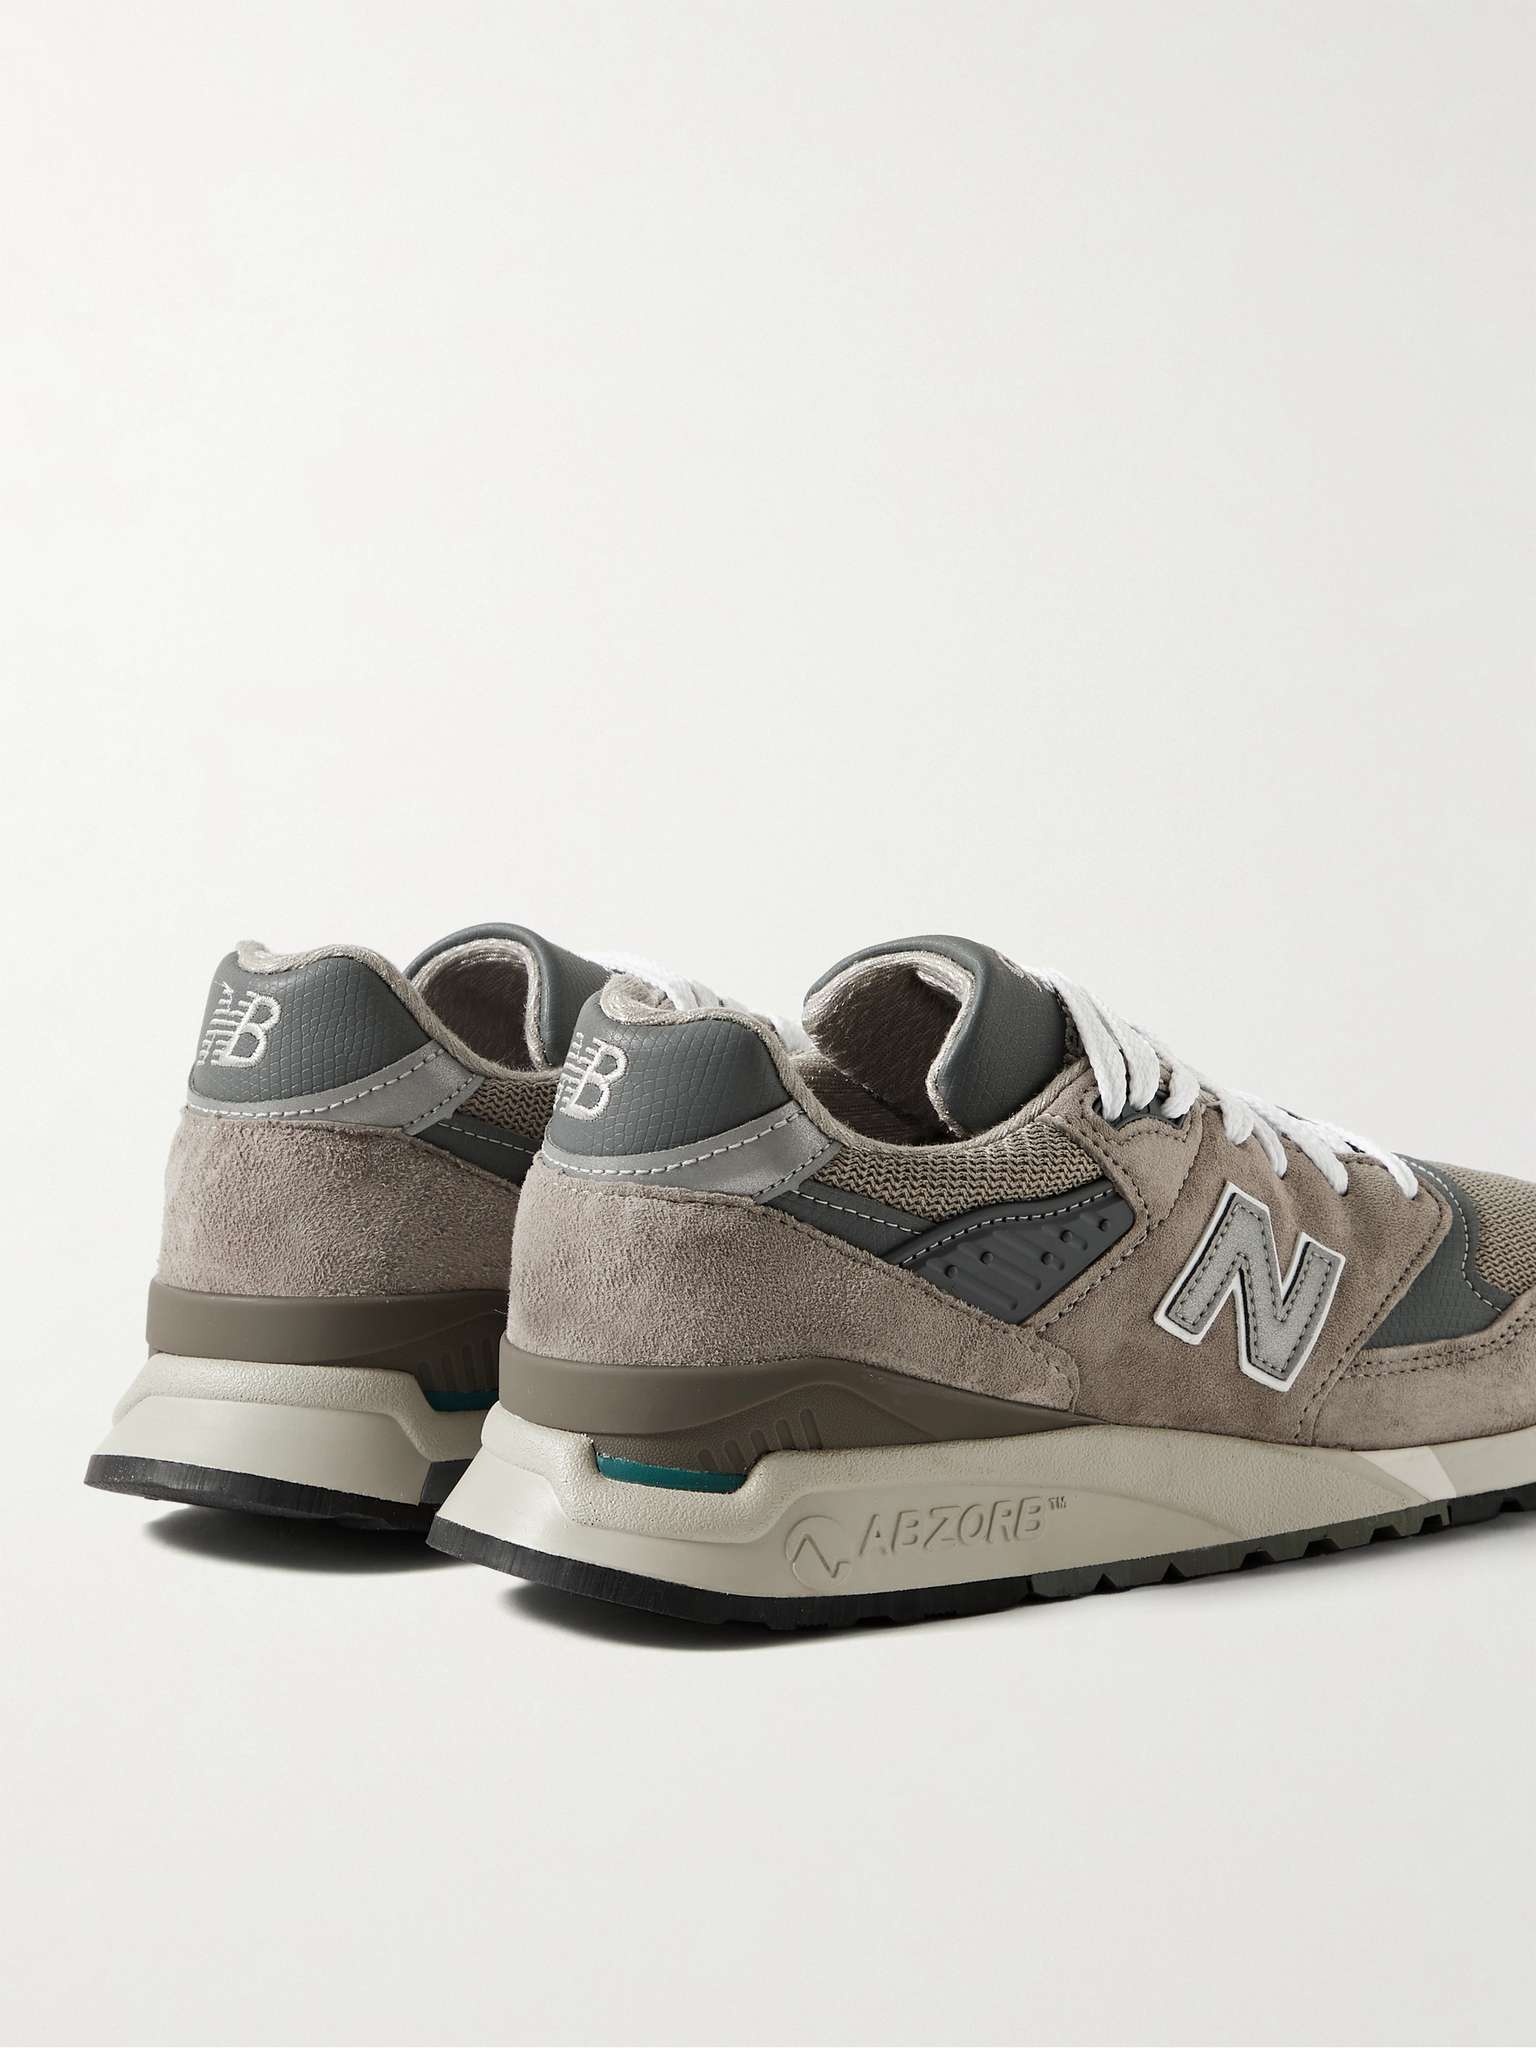 998 Core Rubber-Trimmed Leather, Mesh and Suede Sneakers - 4